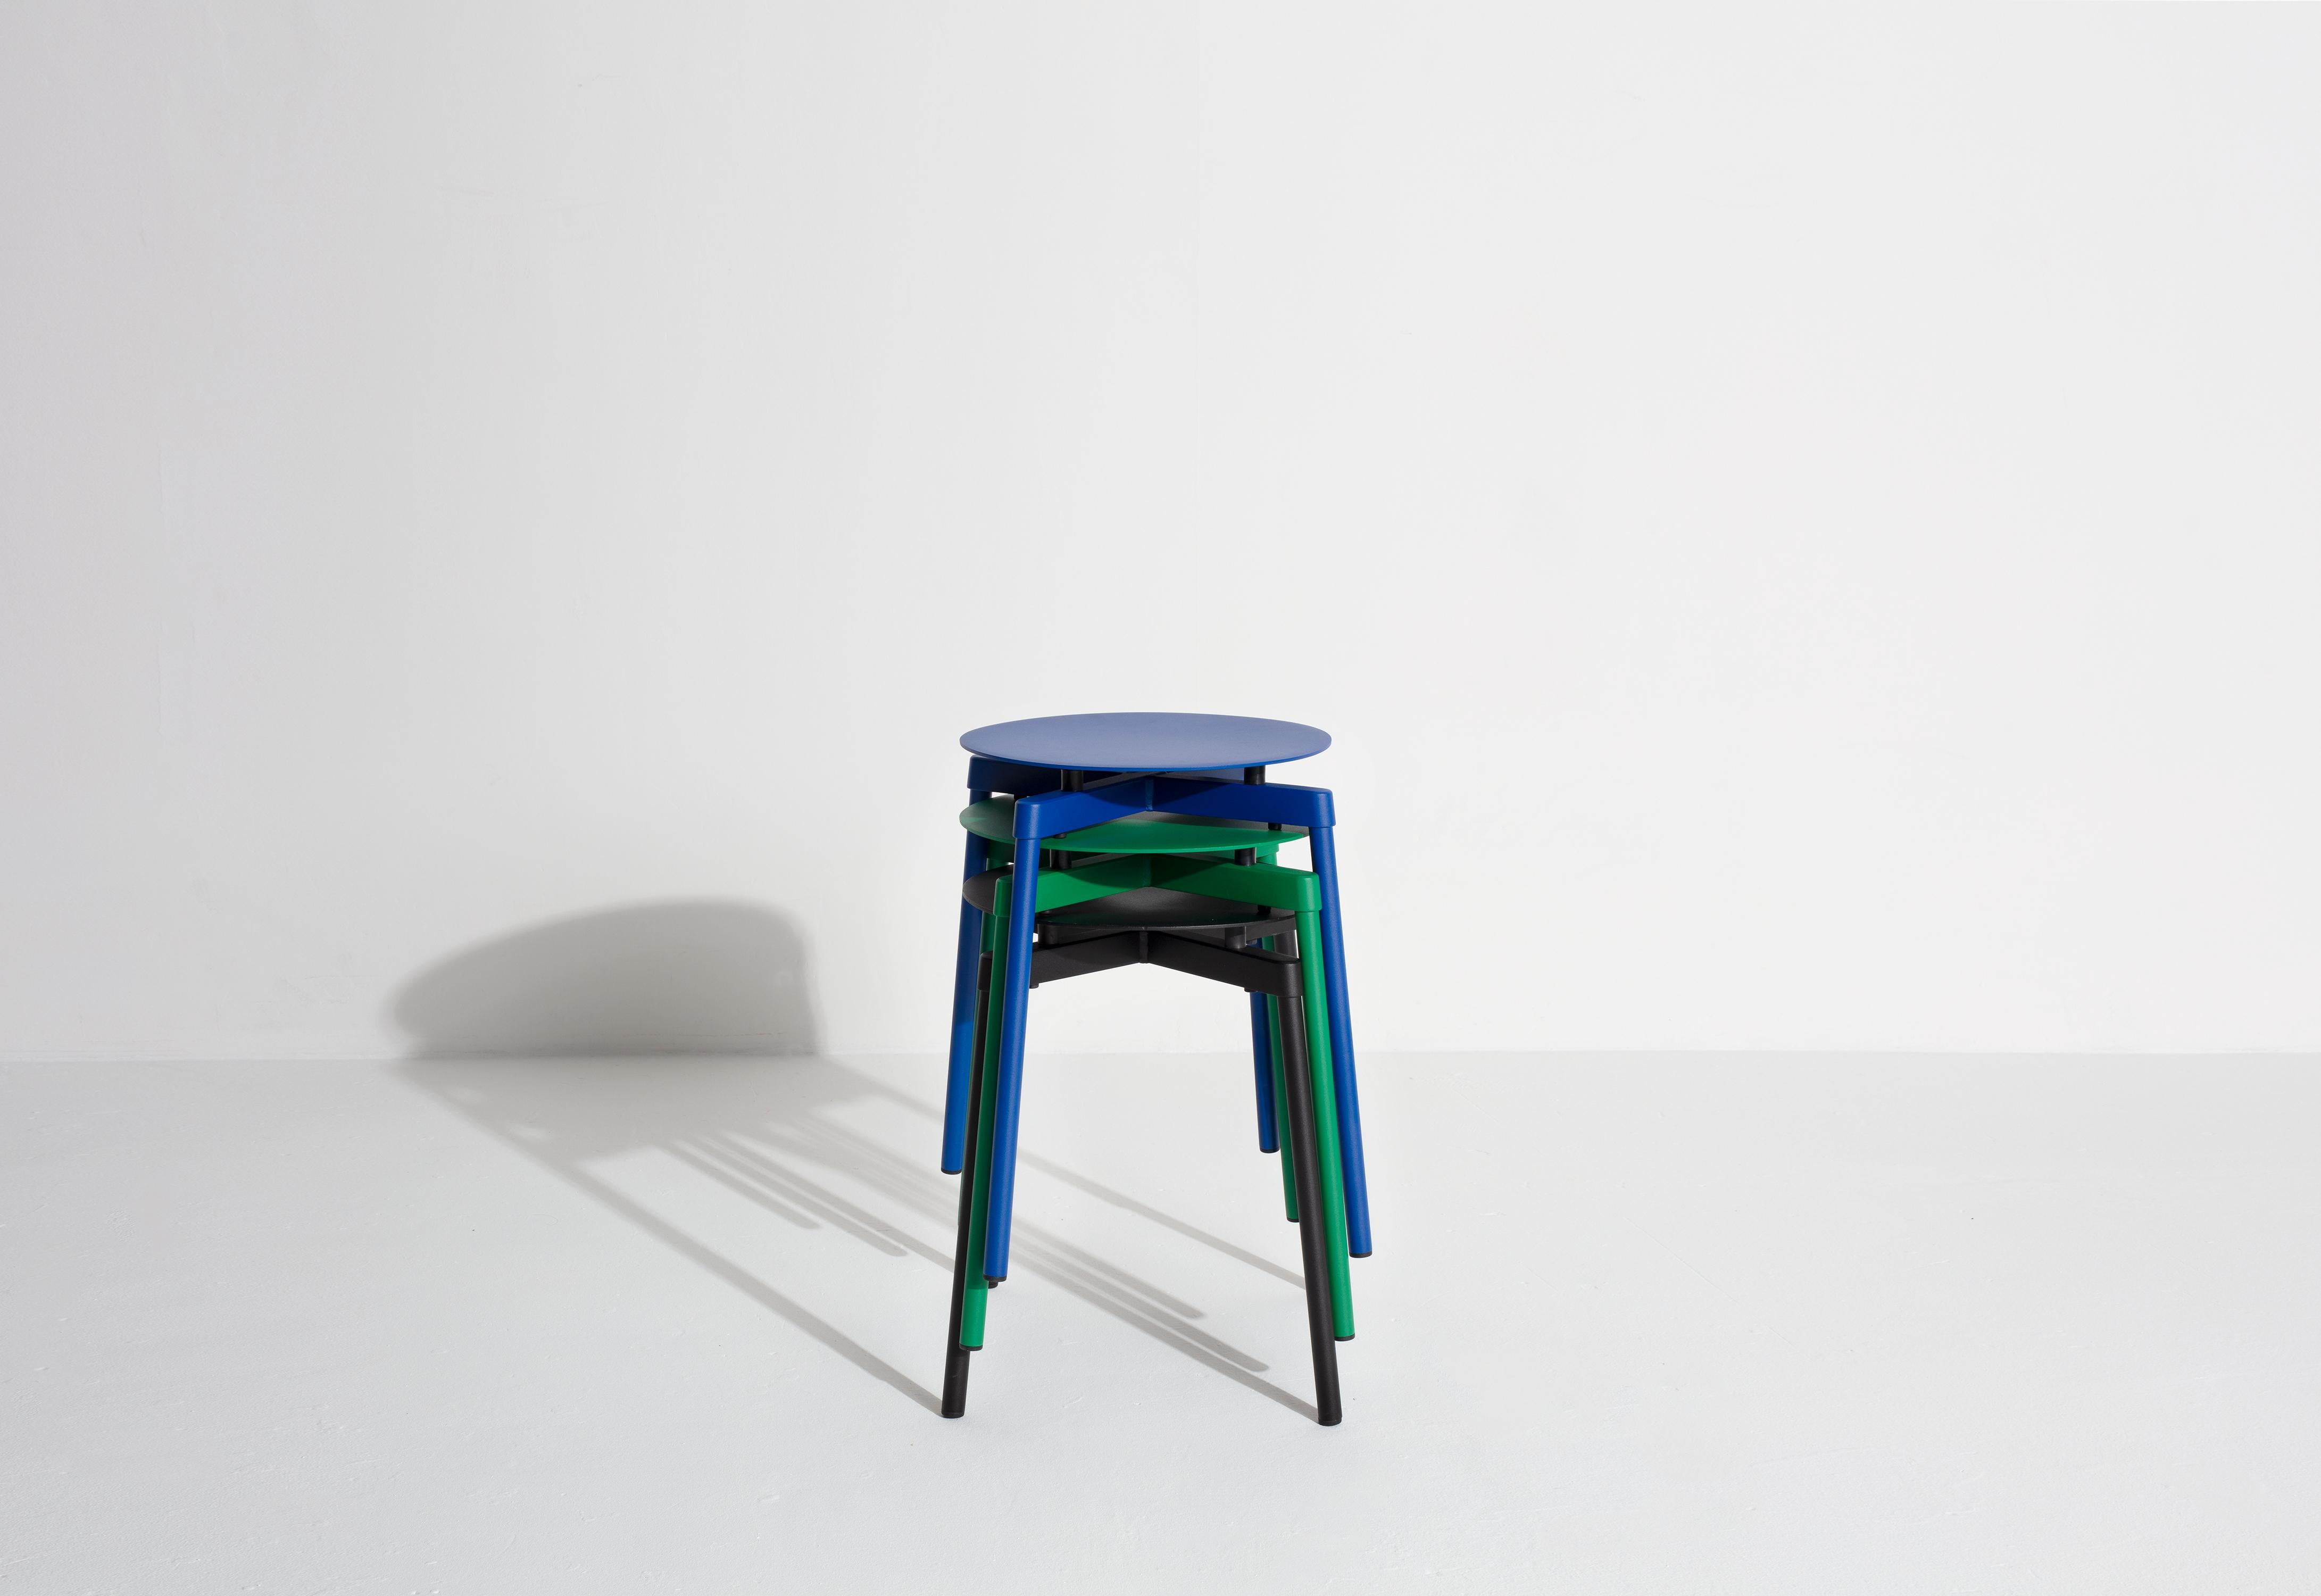 Aluminum Petite Friture Fromme Stool in Blue Aluminium by Tom Chung, 2020 For Sale